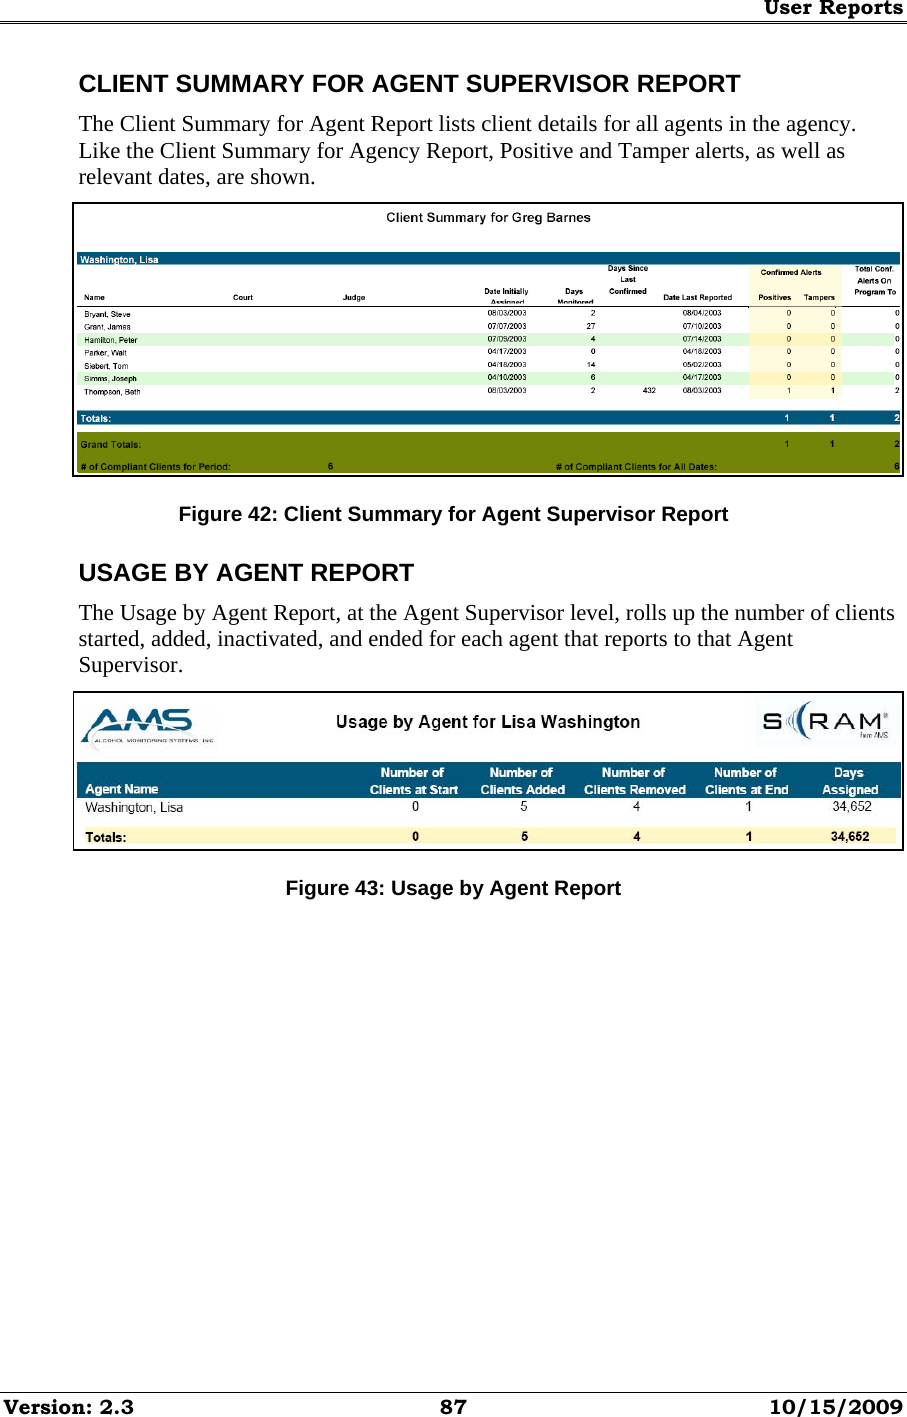 User Reports Version: 2.3  87  10/15/2009 CLIENT SUMMARY FOR AGENT SUPERVISOR REPORT The Client Summary for Agent Report lists client details for all agents in the agency. Like the Client Summary for Agency Report, Positive and Tamper alerts, as well as relevant dates, are shown.  Figure 42: Client Summary for Agent Supervisor Report USAGE BY AGENT REPORT The Usage by Agent Report, at the Agent Supervisor level, rolls up the number of clients started, added, inactivated, and ended for each agent that reports to that Agent Supervisor.  Figure 43: Usage by Agent Report 